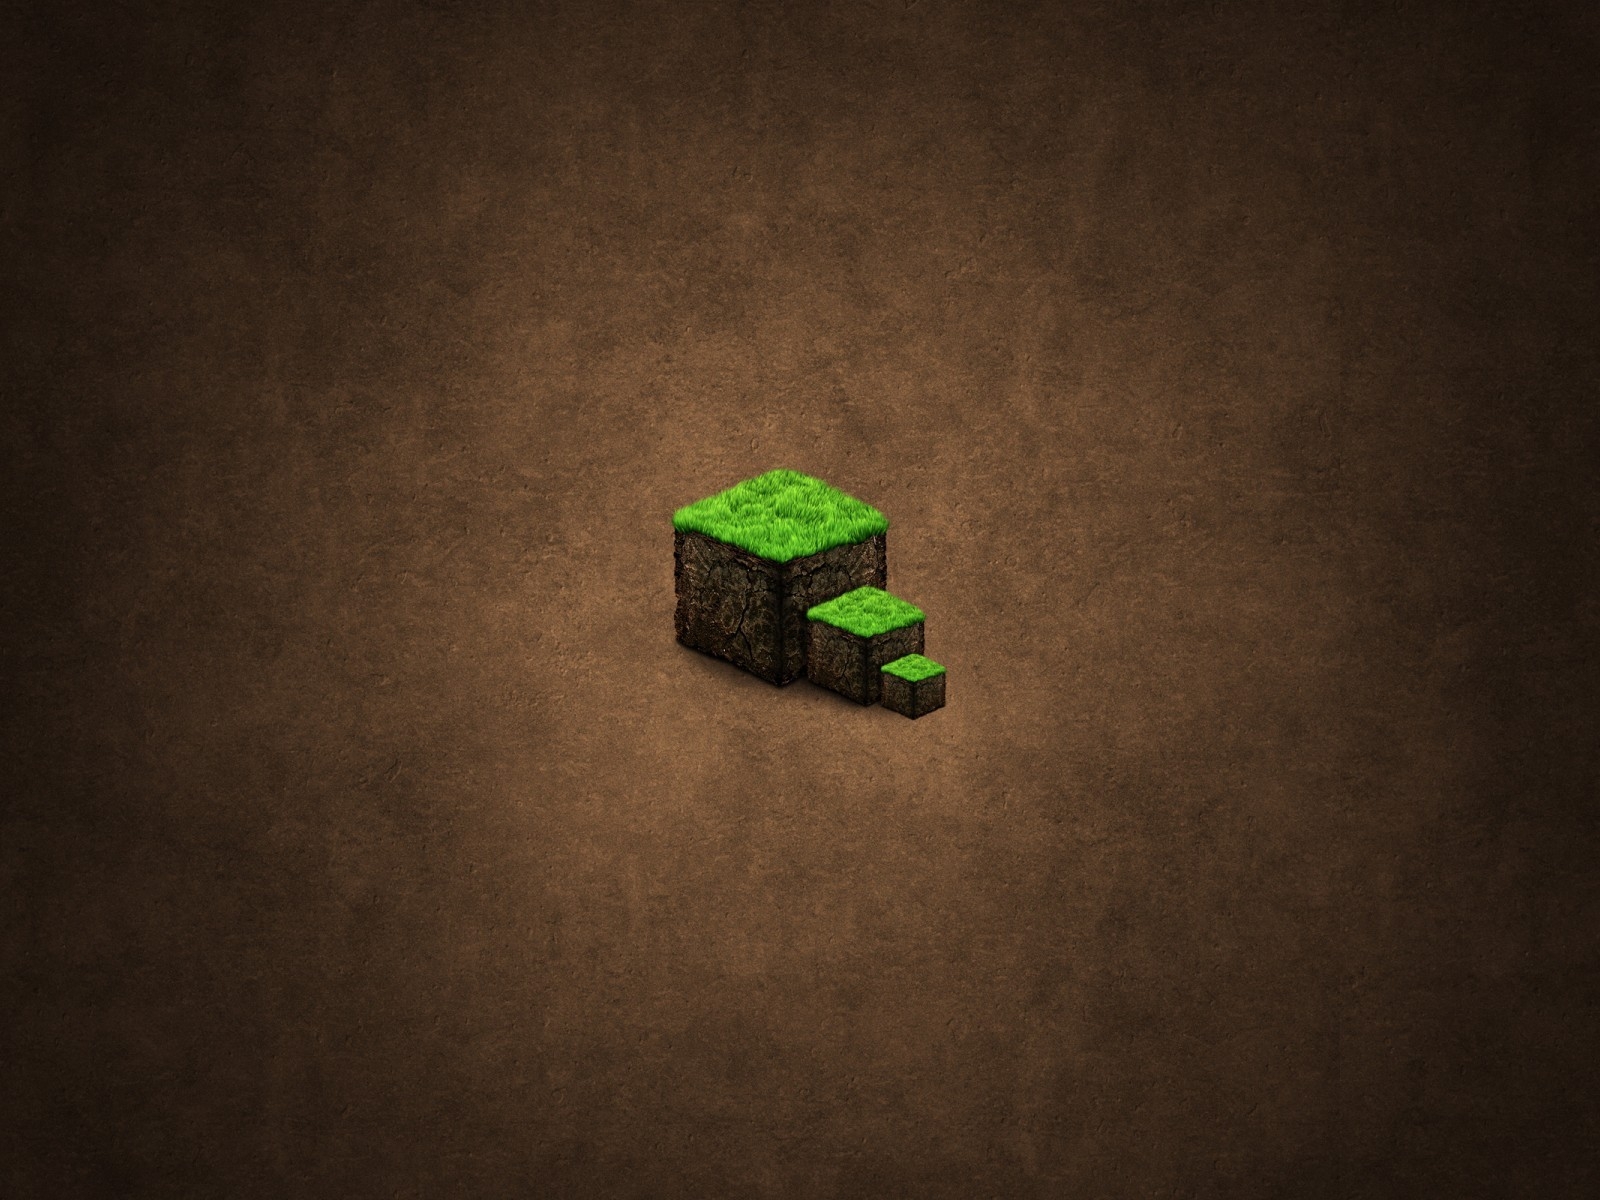 Minecraft Green Cubes for 1600 x 1200 resolution